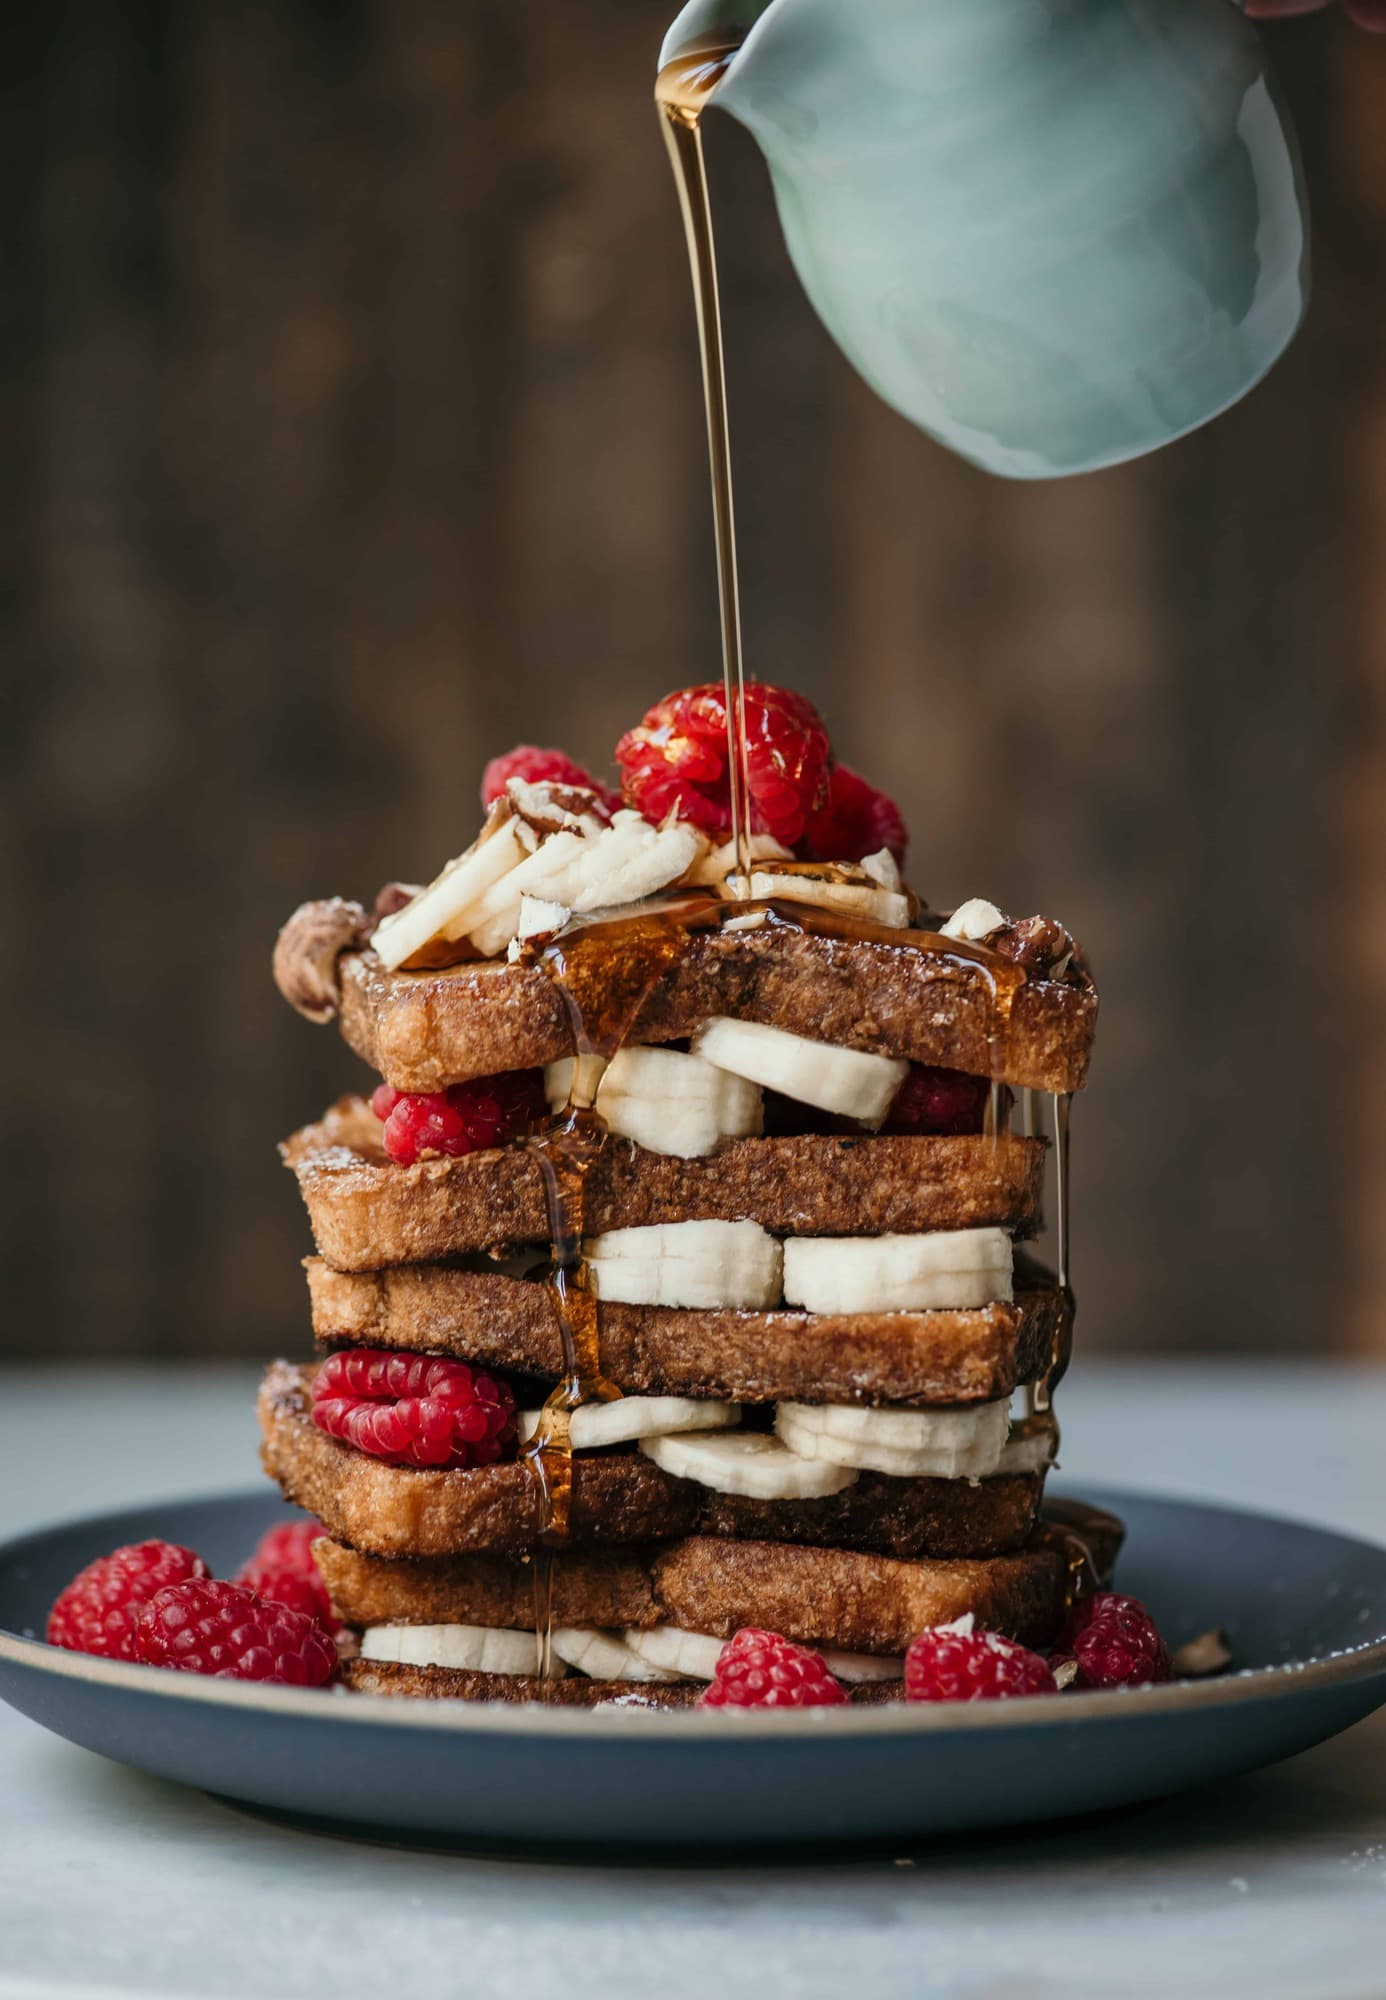 Maple syrup pouring over a stack of french toast with sliced bananas and raspberries